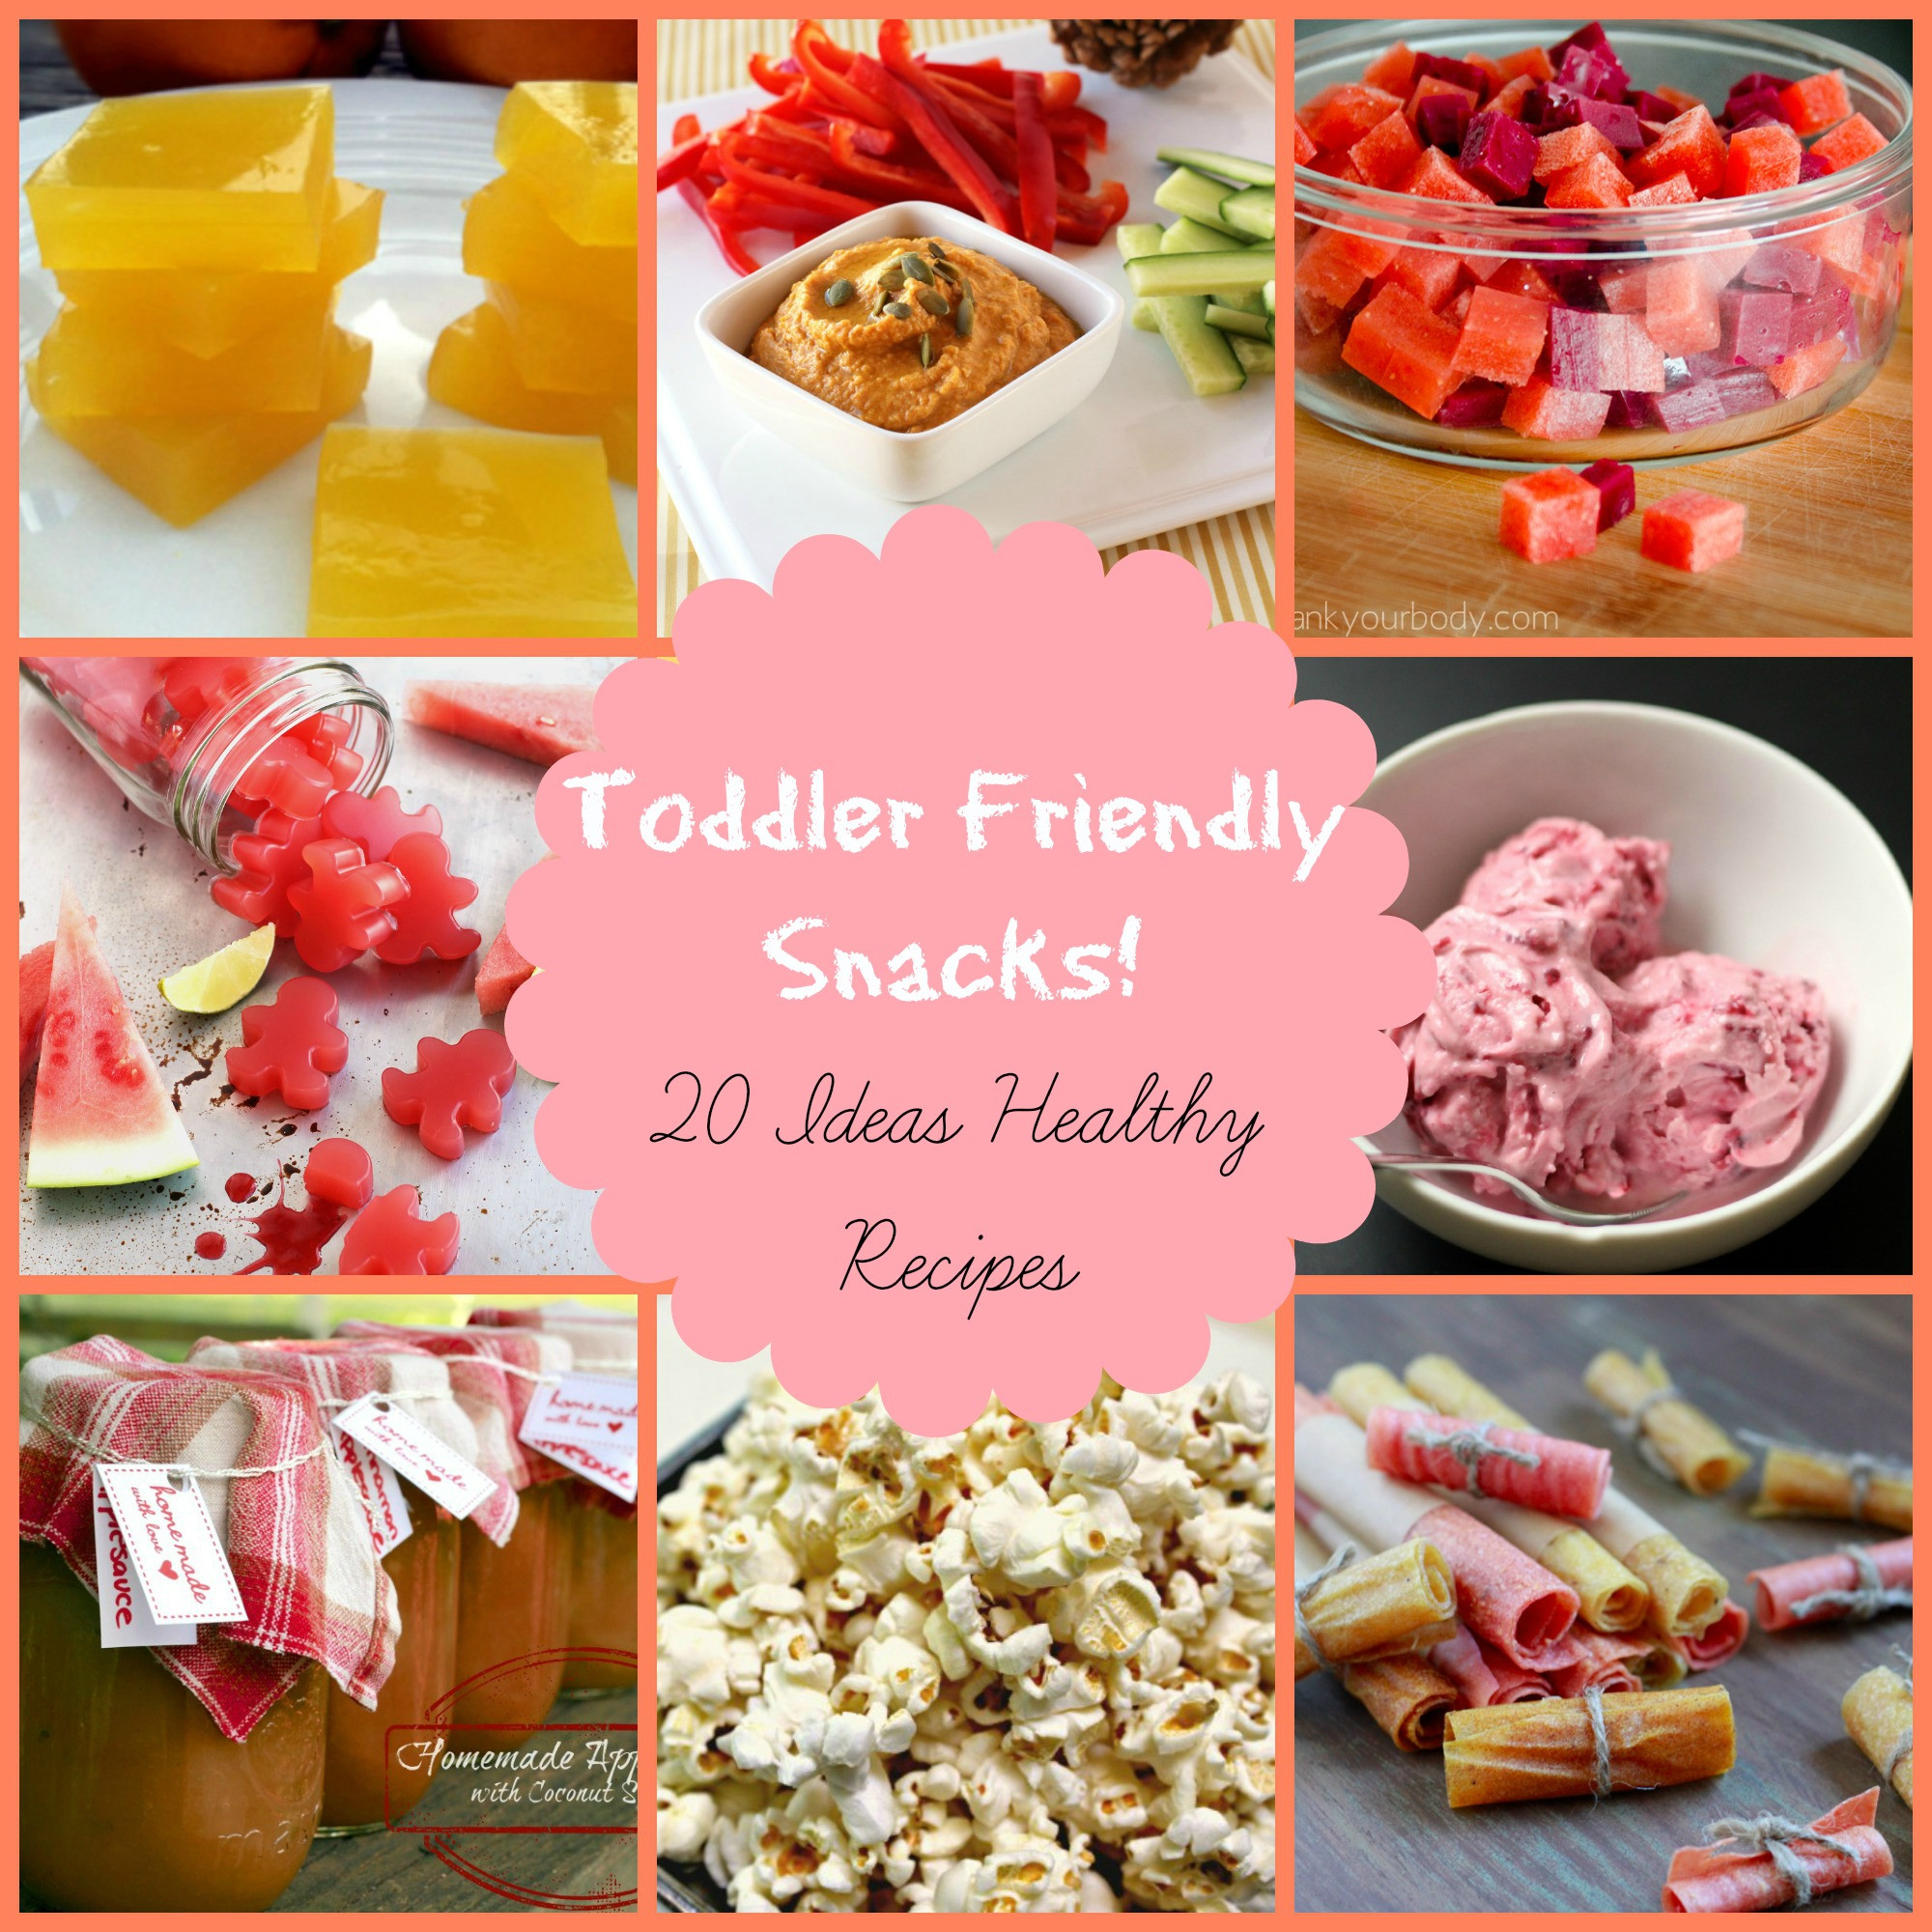 Healthy Toddler Snacks
 Healthy Snacks for Kids 20 toddler friendly ideas